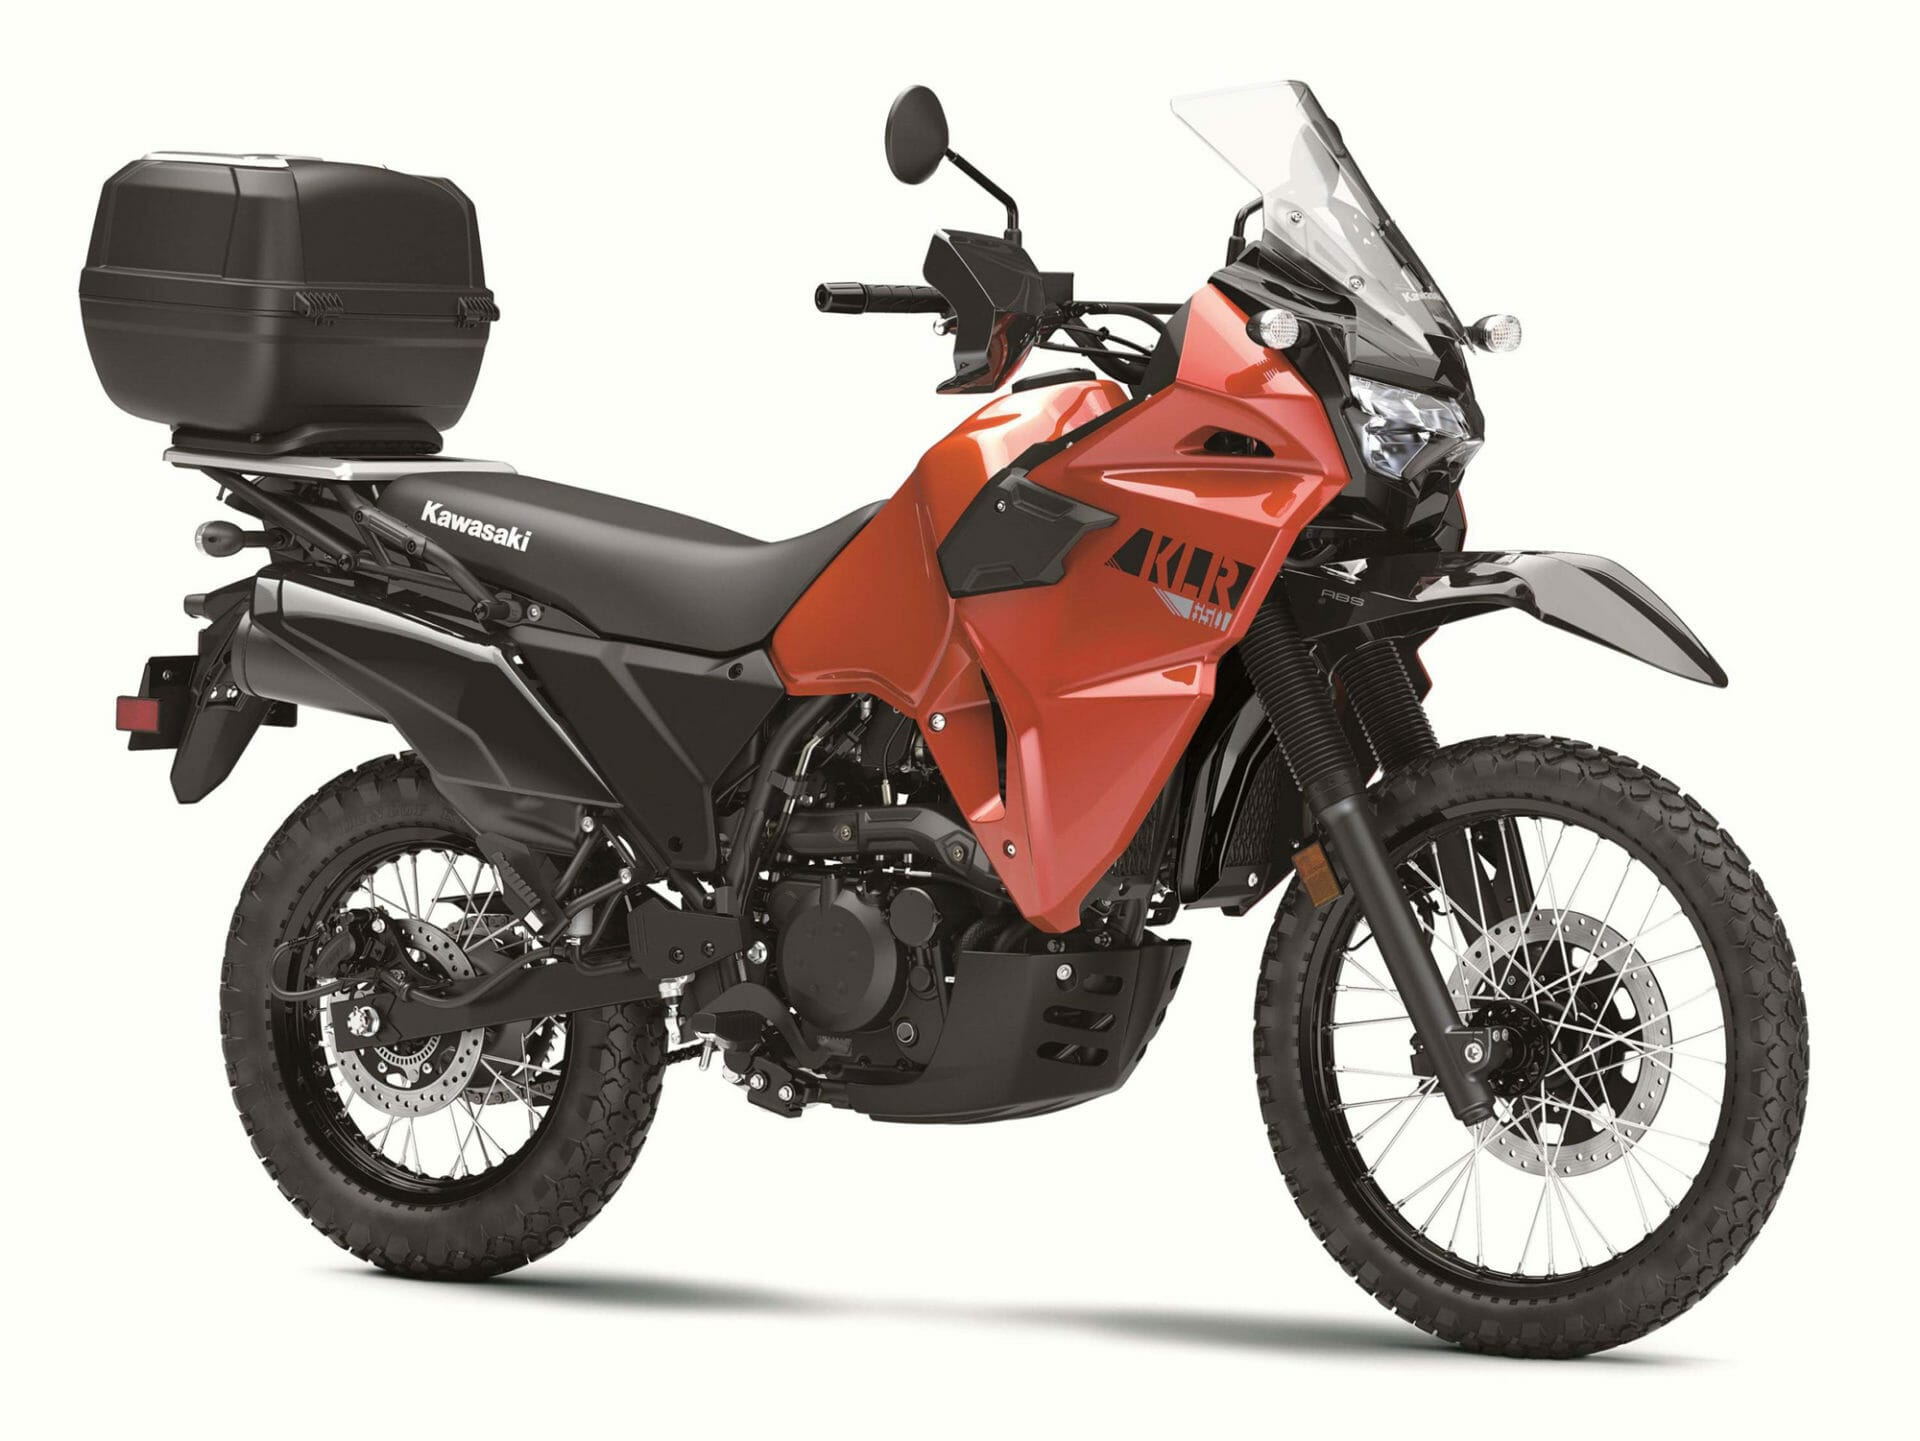 New Kawasaki KLR 650, but only for America
- also in the MOTORCYCLES.NEWS APP